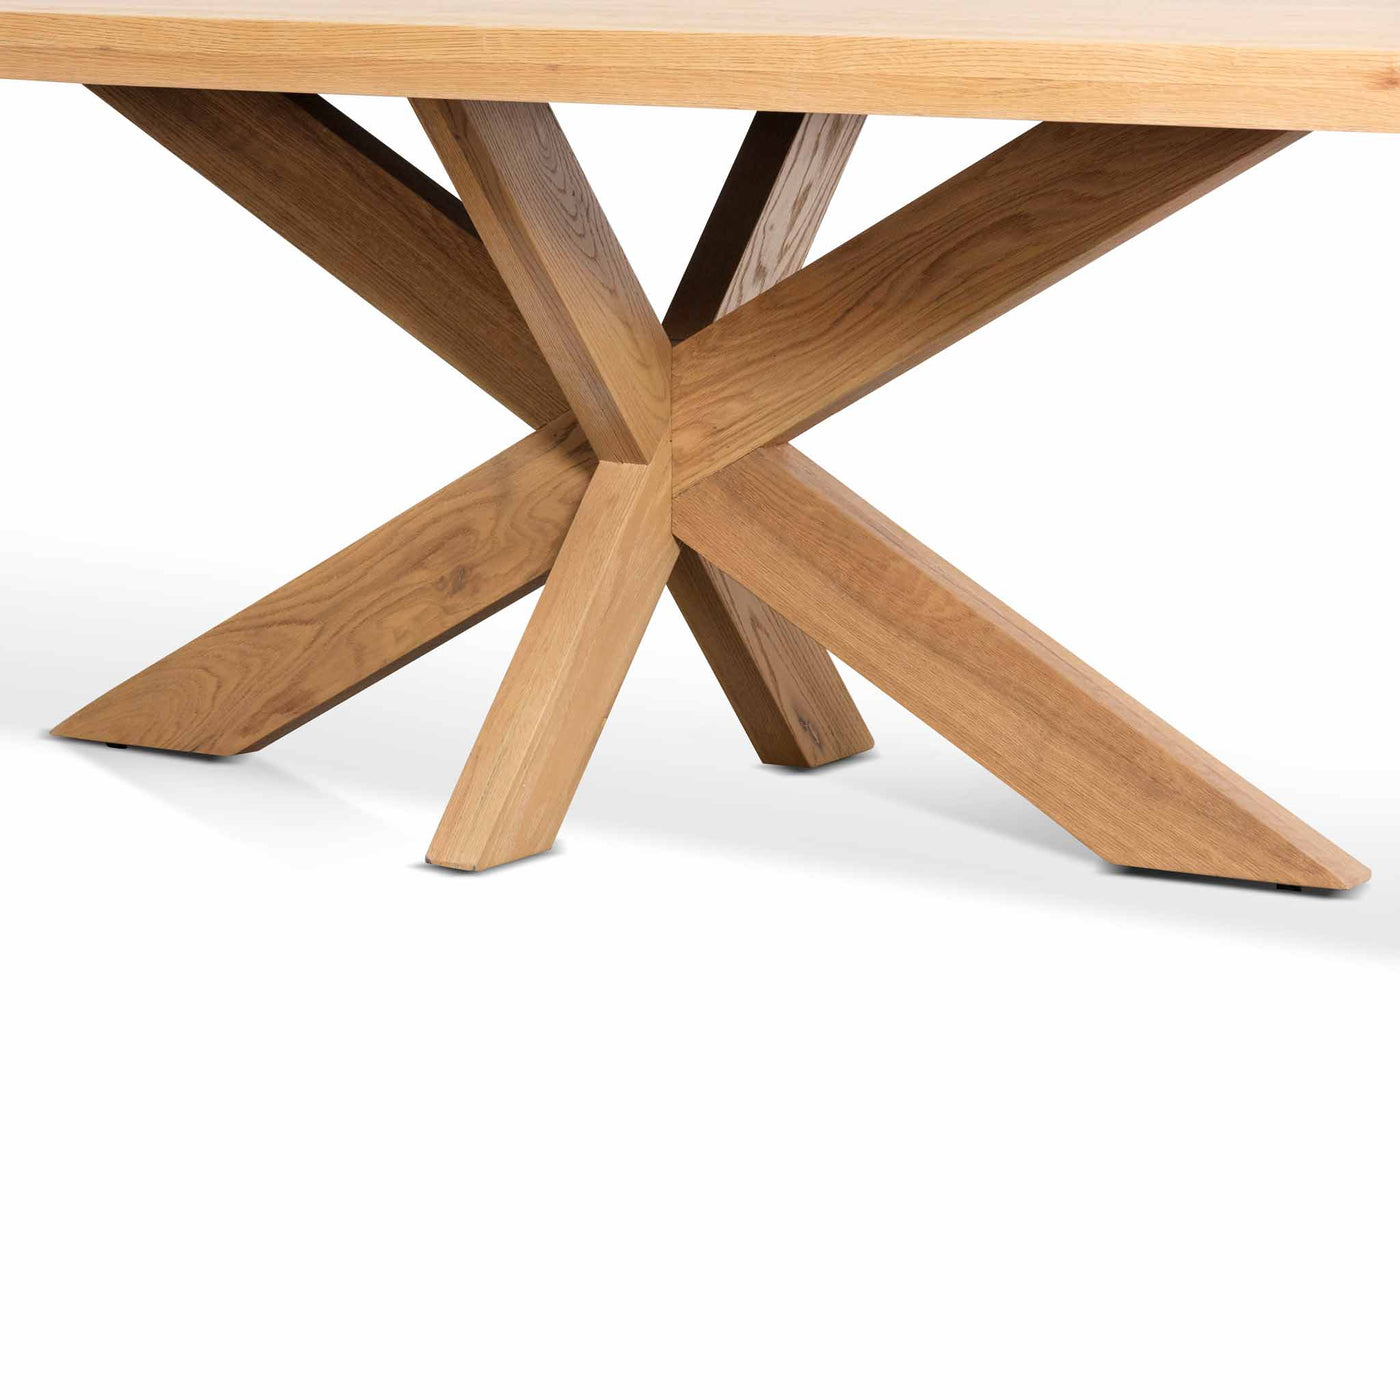 2.2m Wooden Dining Table - Distress Natural